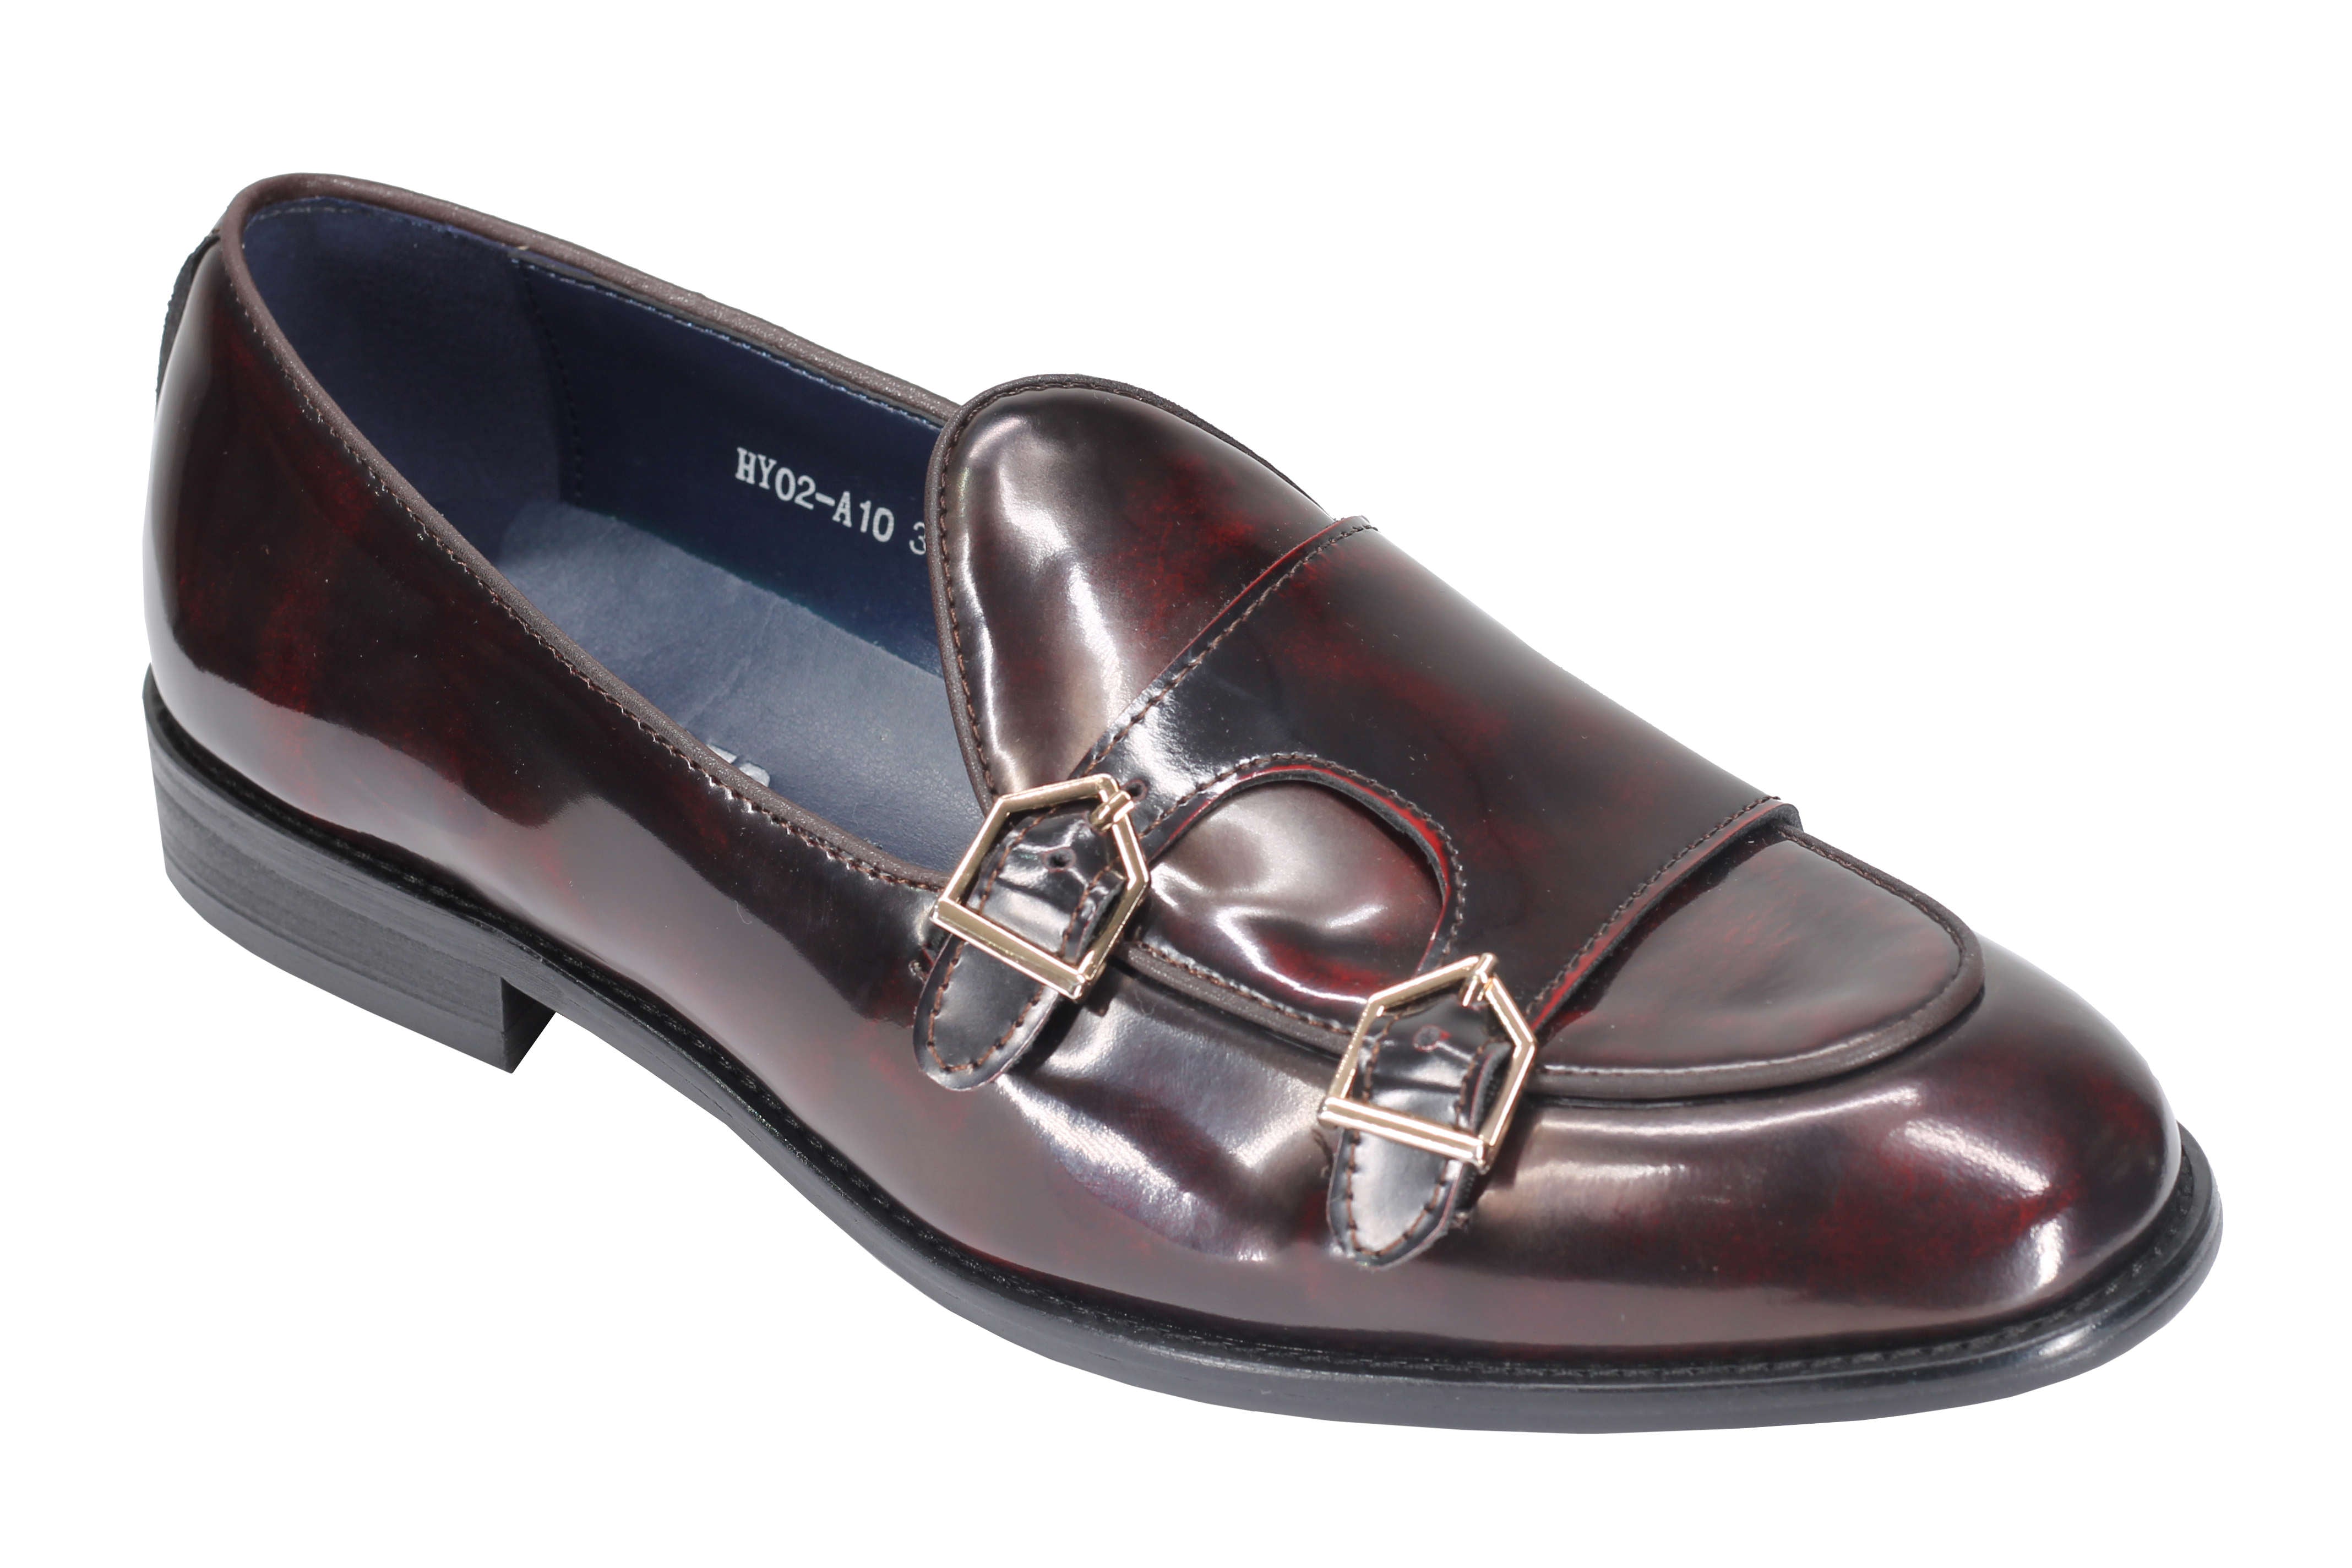 Mens Double Monk Loafers in Maroon Wine Patent Real Leather Slip on Shoes